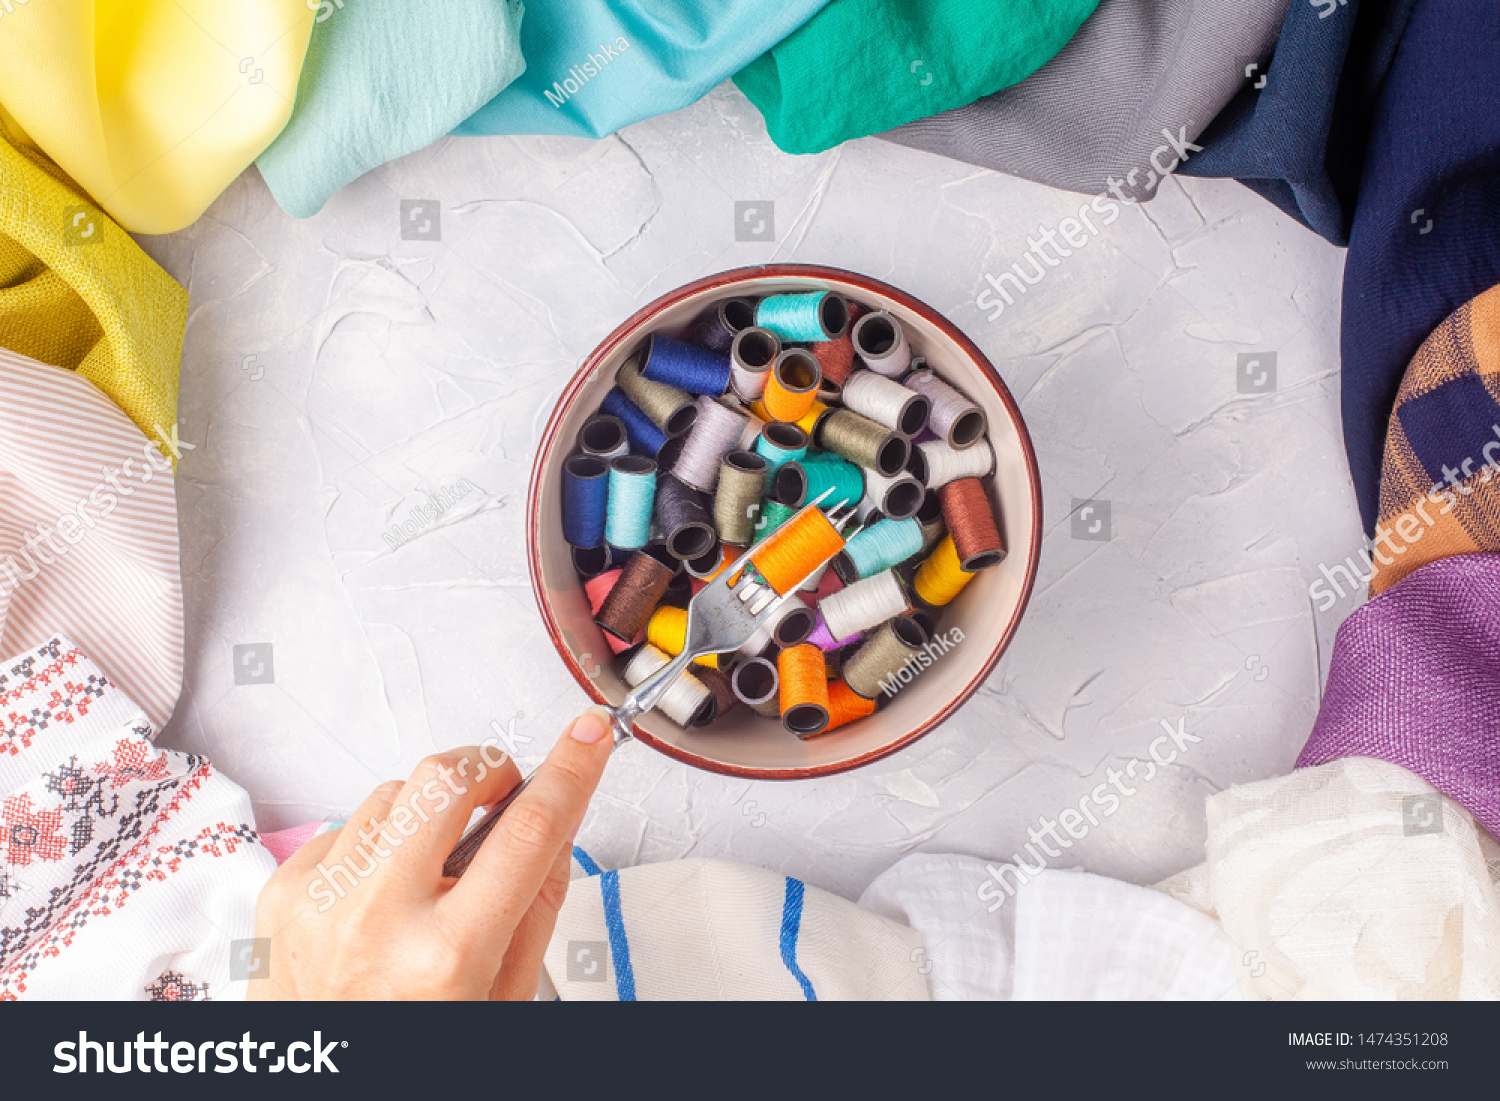 Woman holds fork with spool of thread under the bowl with spools in fabric multi-colored frame on grey background #1474351208